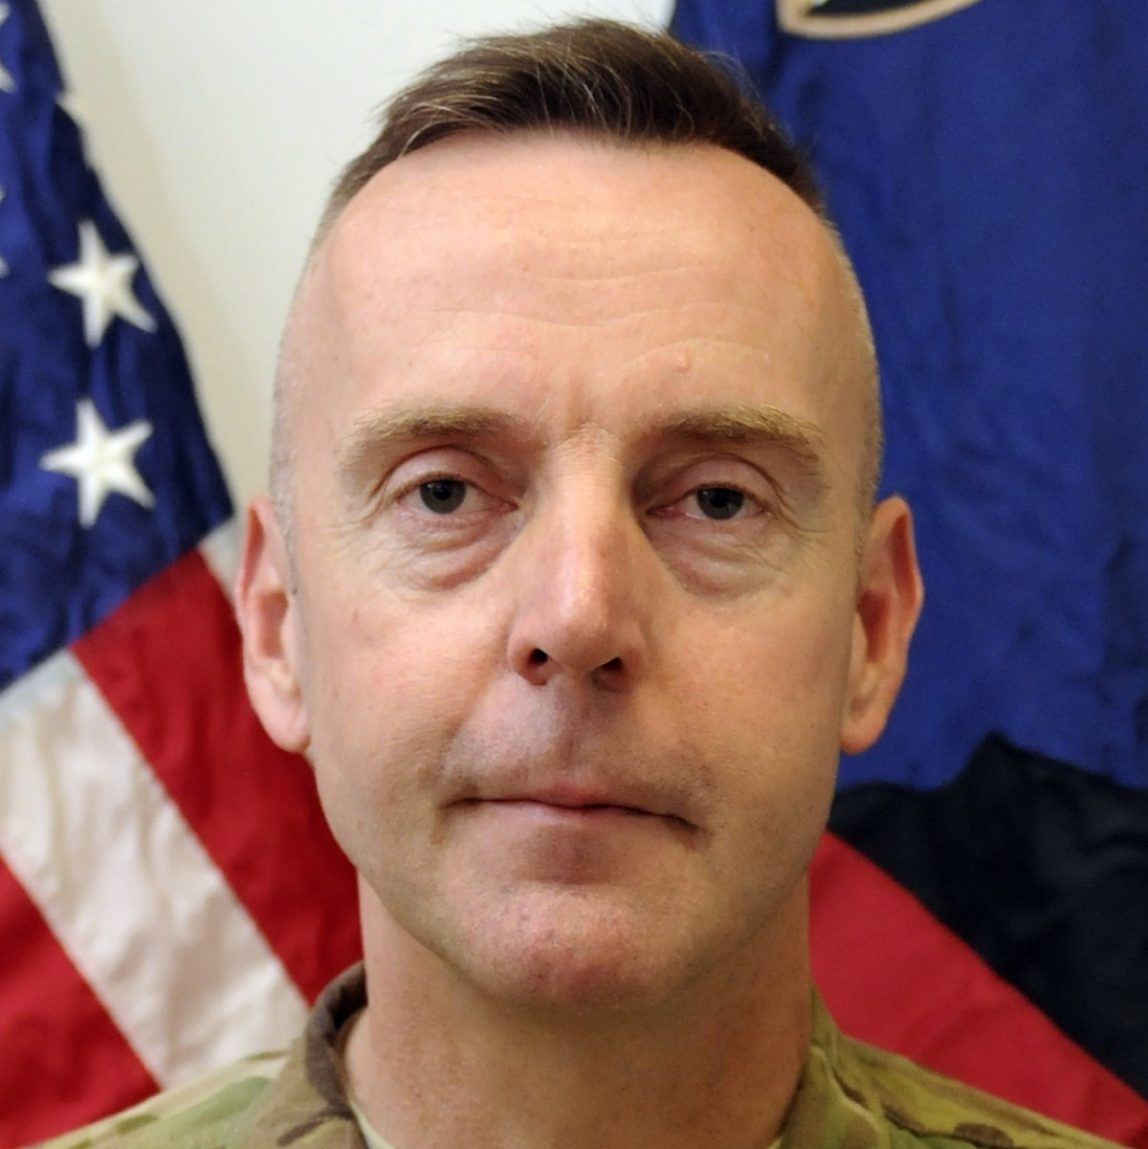 This undated file photo provided by the U.S. Army shows Brig. Gen. Jeffrey A. Sinclair. Sinclair, fired from his command in Afghanistan in May 2012 and now facing a court-martial on charges of sodomy, adultery and pornography and more, is just one in a long line of commanders whose careers were ended because of possible sexual misconduct. (AP Photo/U.S. Army, File)